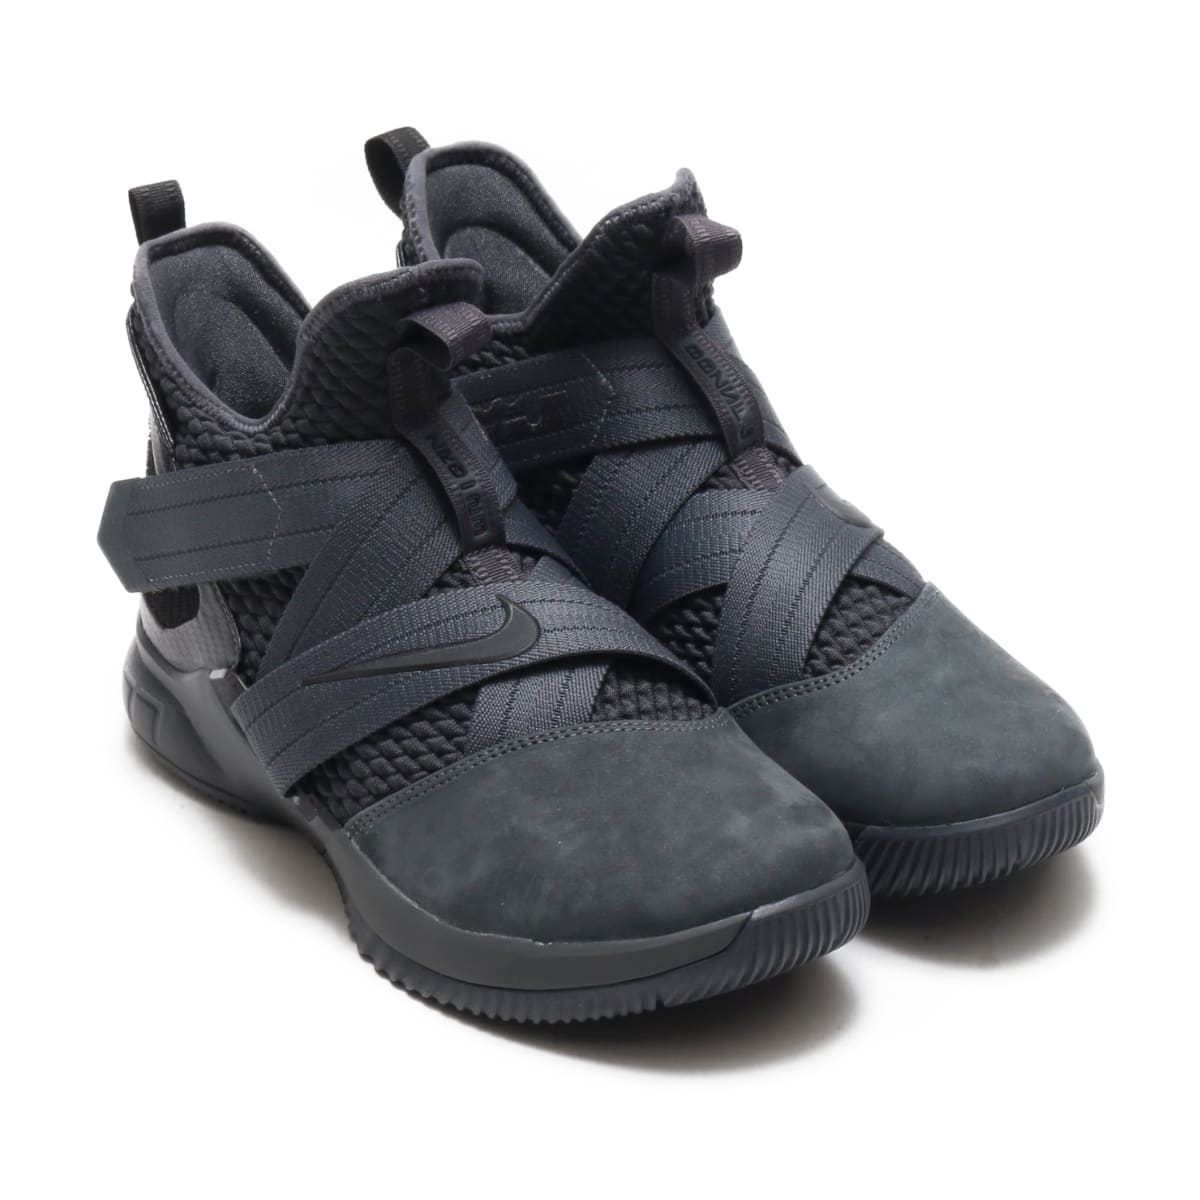 lebron soldier 12 black and grey